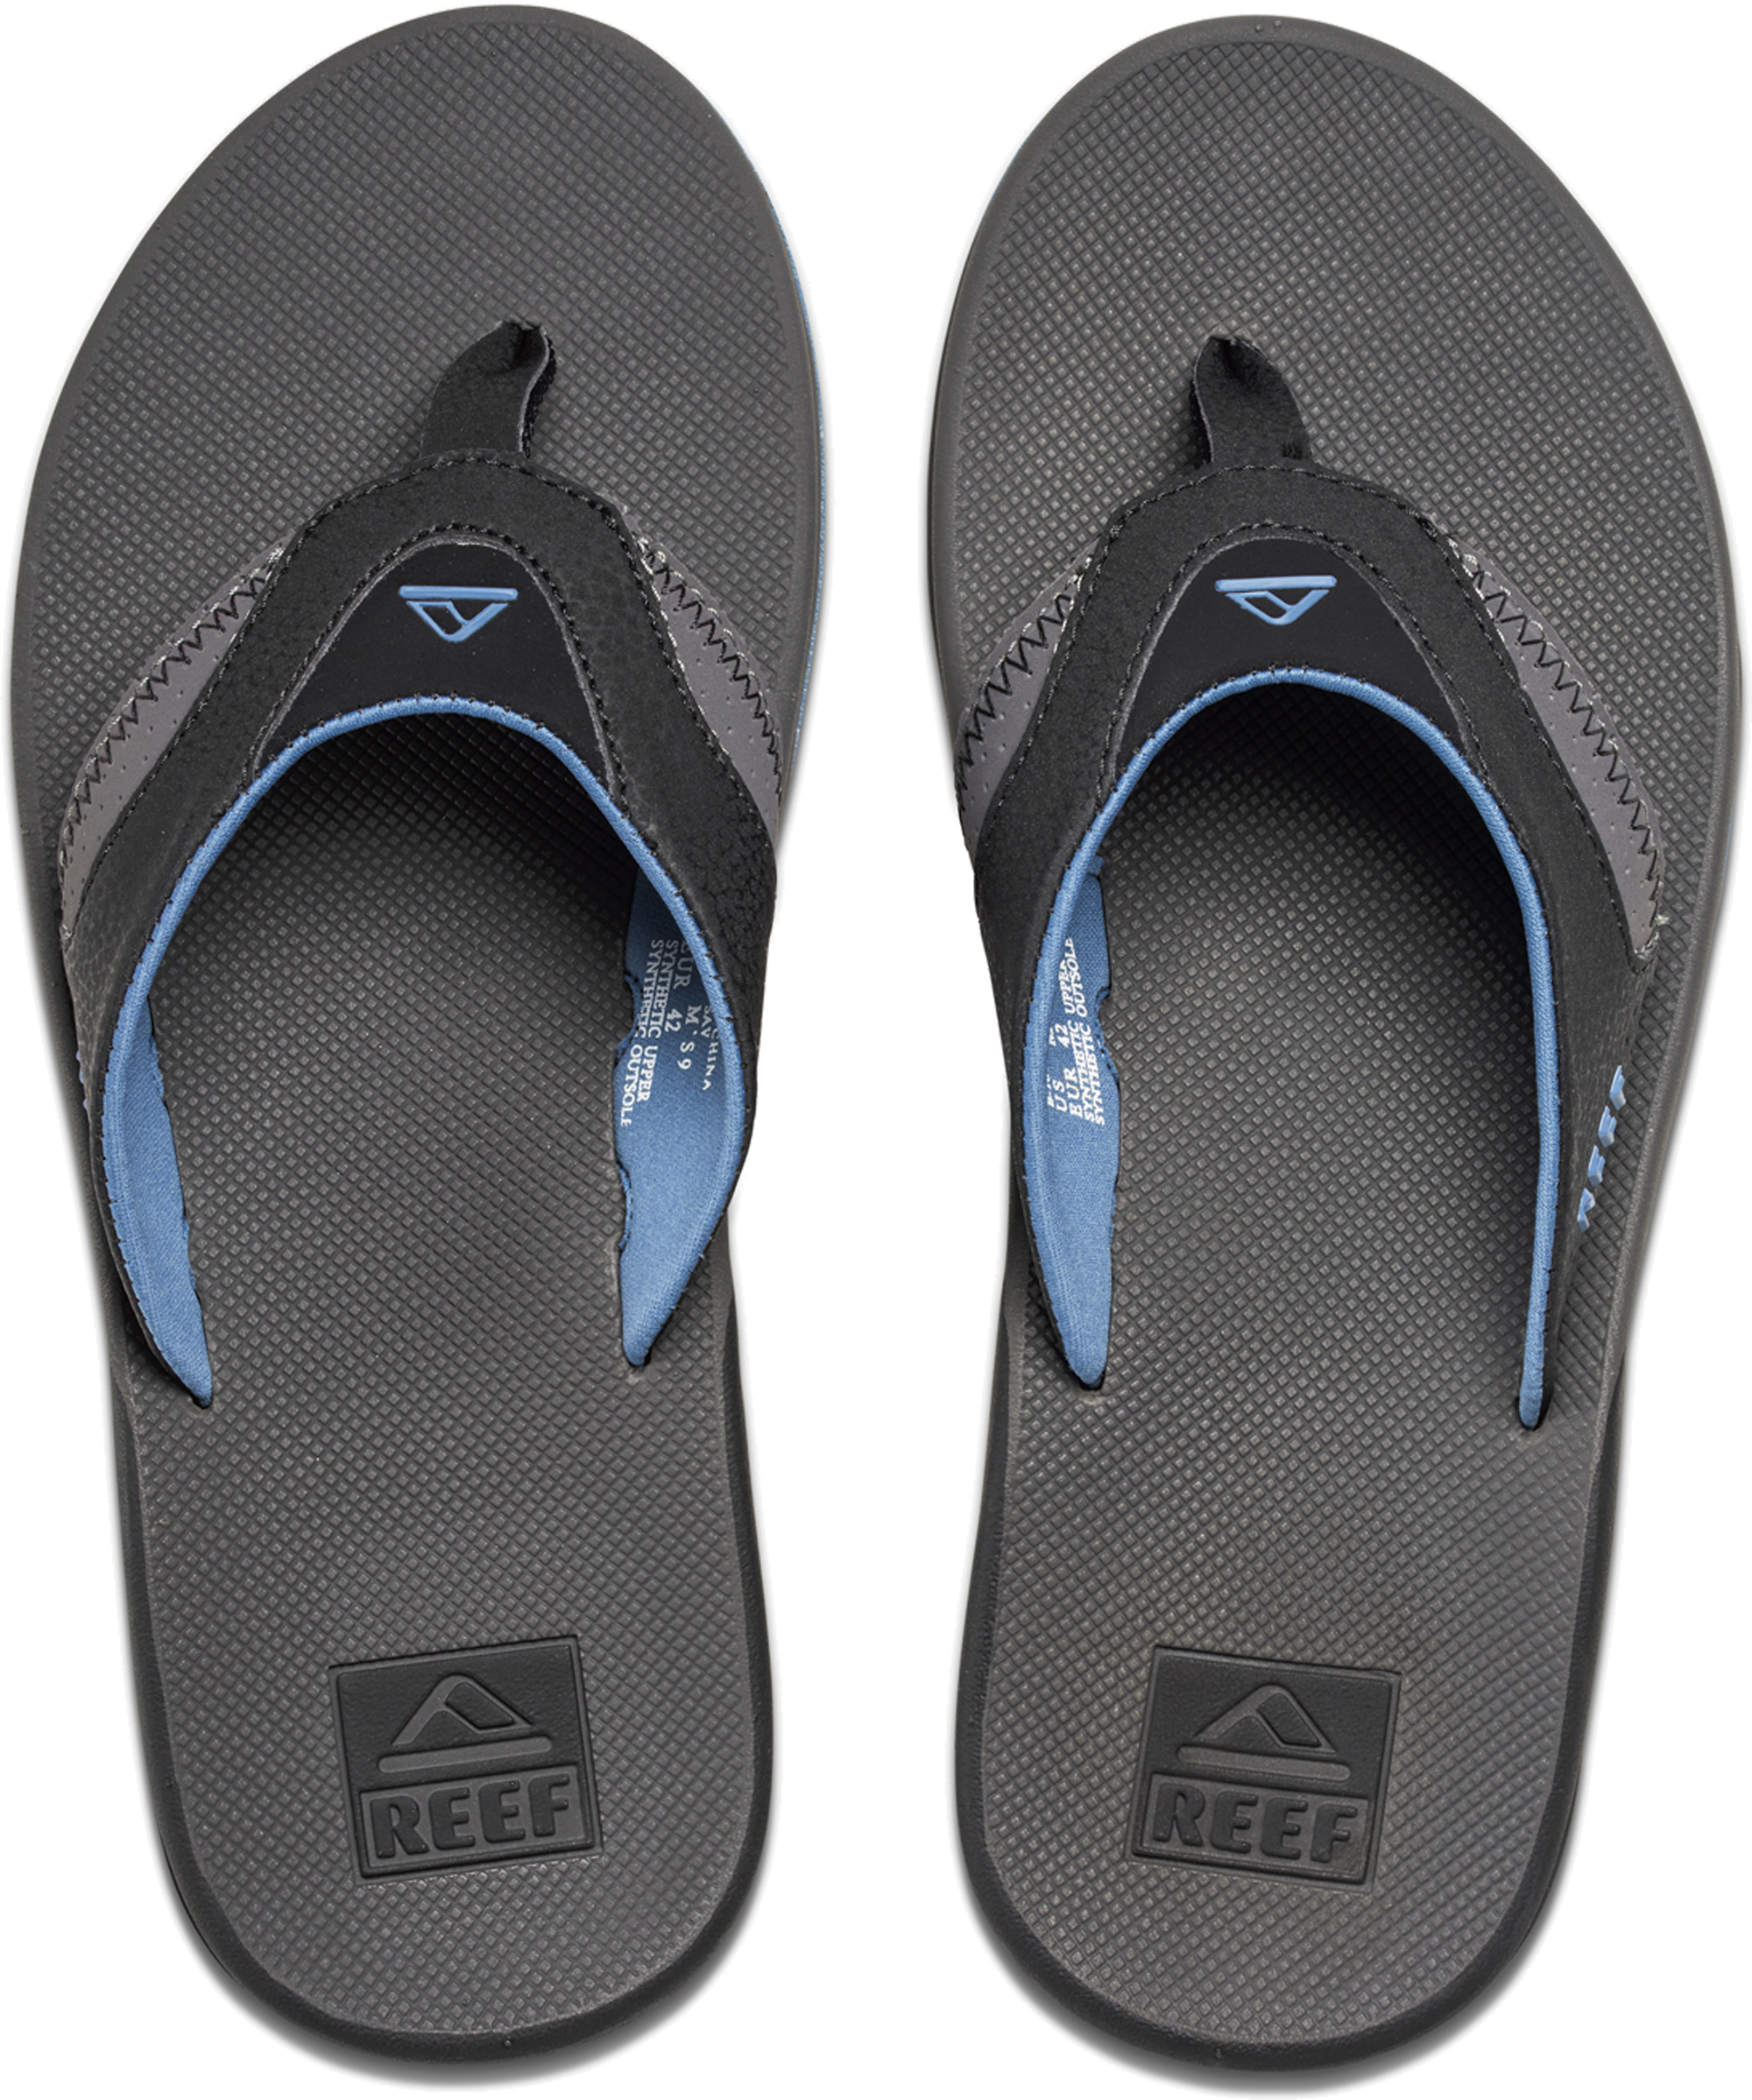 Reef Flip Flops and Sandals | UK Stock, Shipped from Cornwall ...